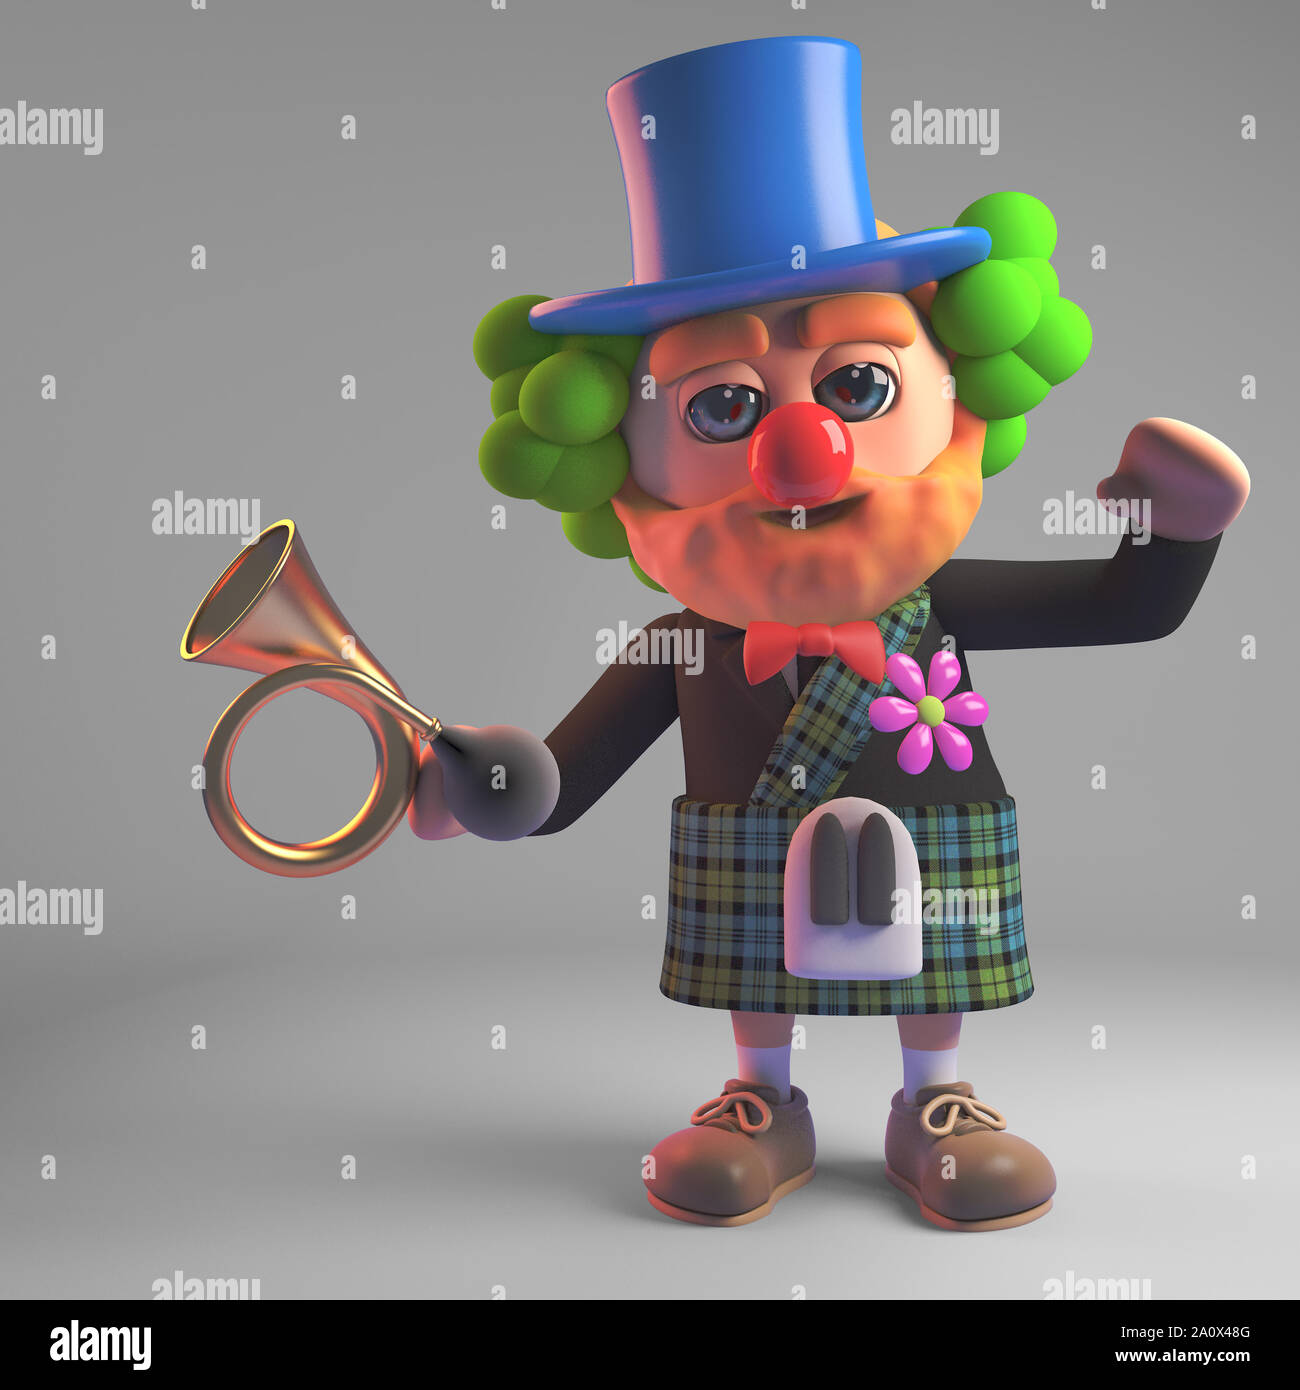 Funny cartoon 3d Scottish man in kilt wearing a clown red nose and holding an old car horn, 3d illustration render Stock Photo